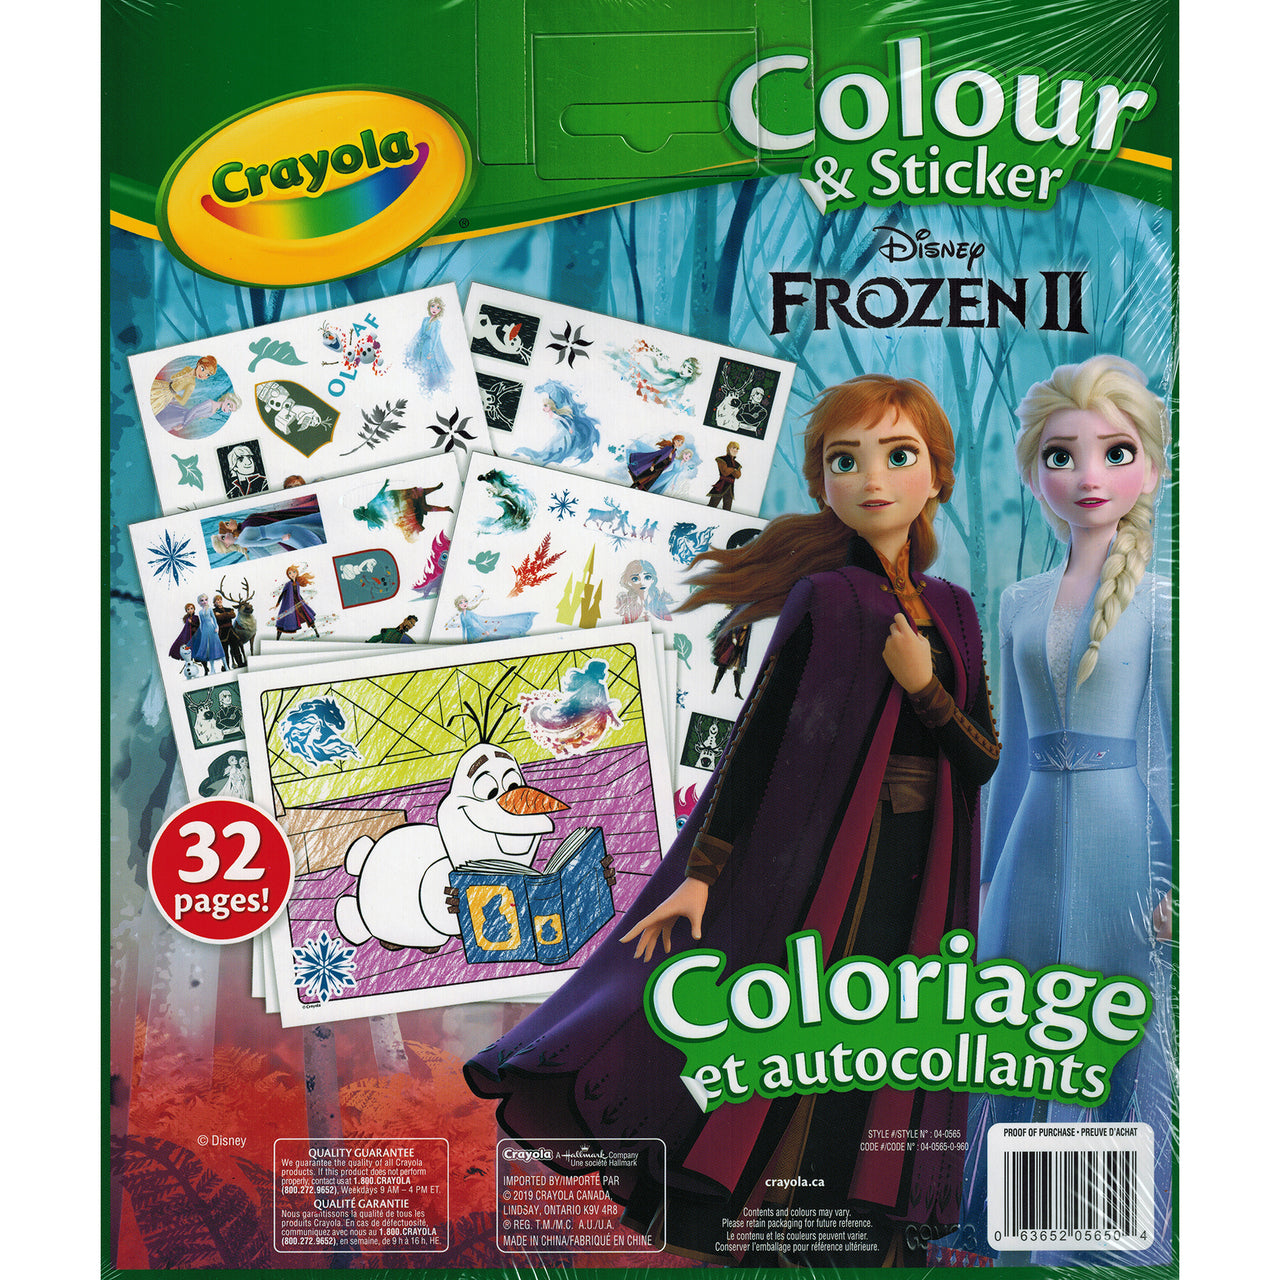 Crayola Disney Frozen II Color & Sticker Book - 50 Stickers - 32 Pages